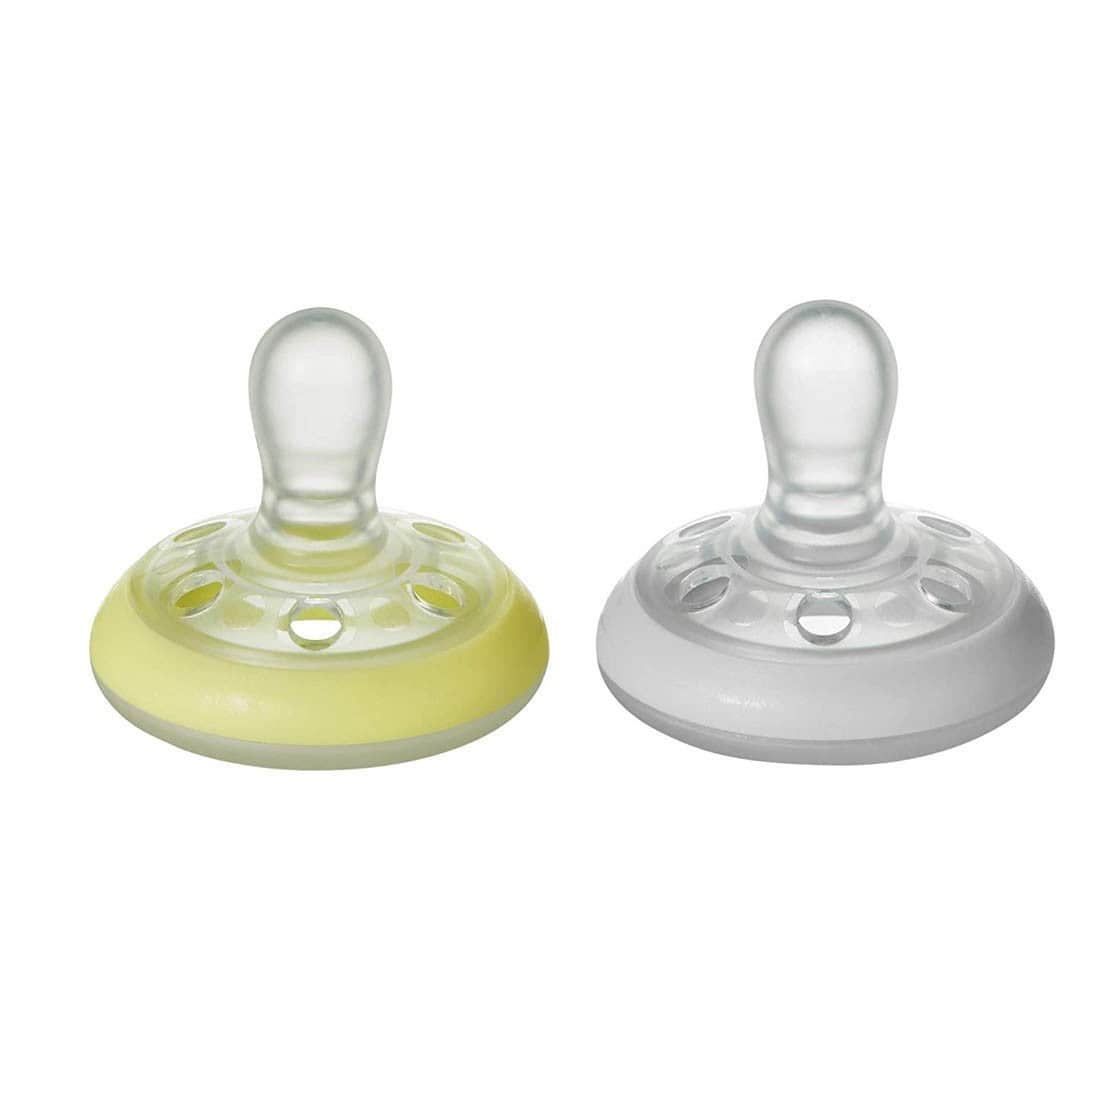 Tommee Tippee Breast Like Soothers Night Time 6-18 months – Pack of 2